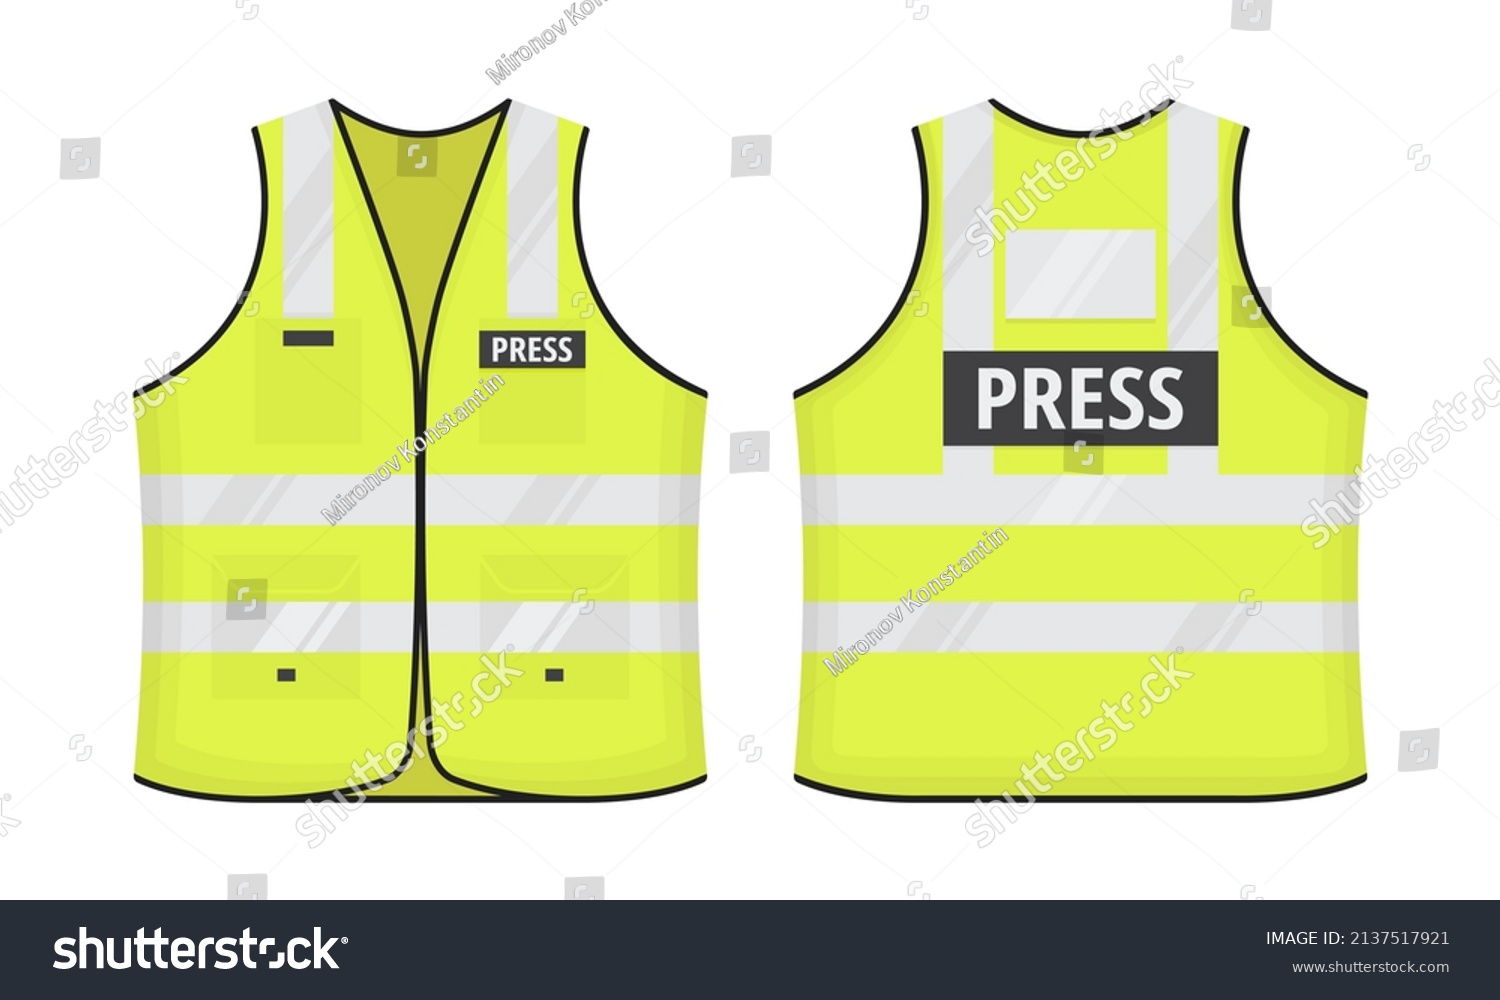 SVG of Safety reflective vest with label PRESS tag flat style design vector illustration set. Yellow fluorescent security safety work jacket with reflective stripes. Front and back view road uniform vest. svg